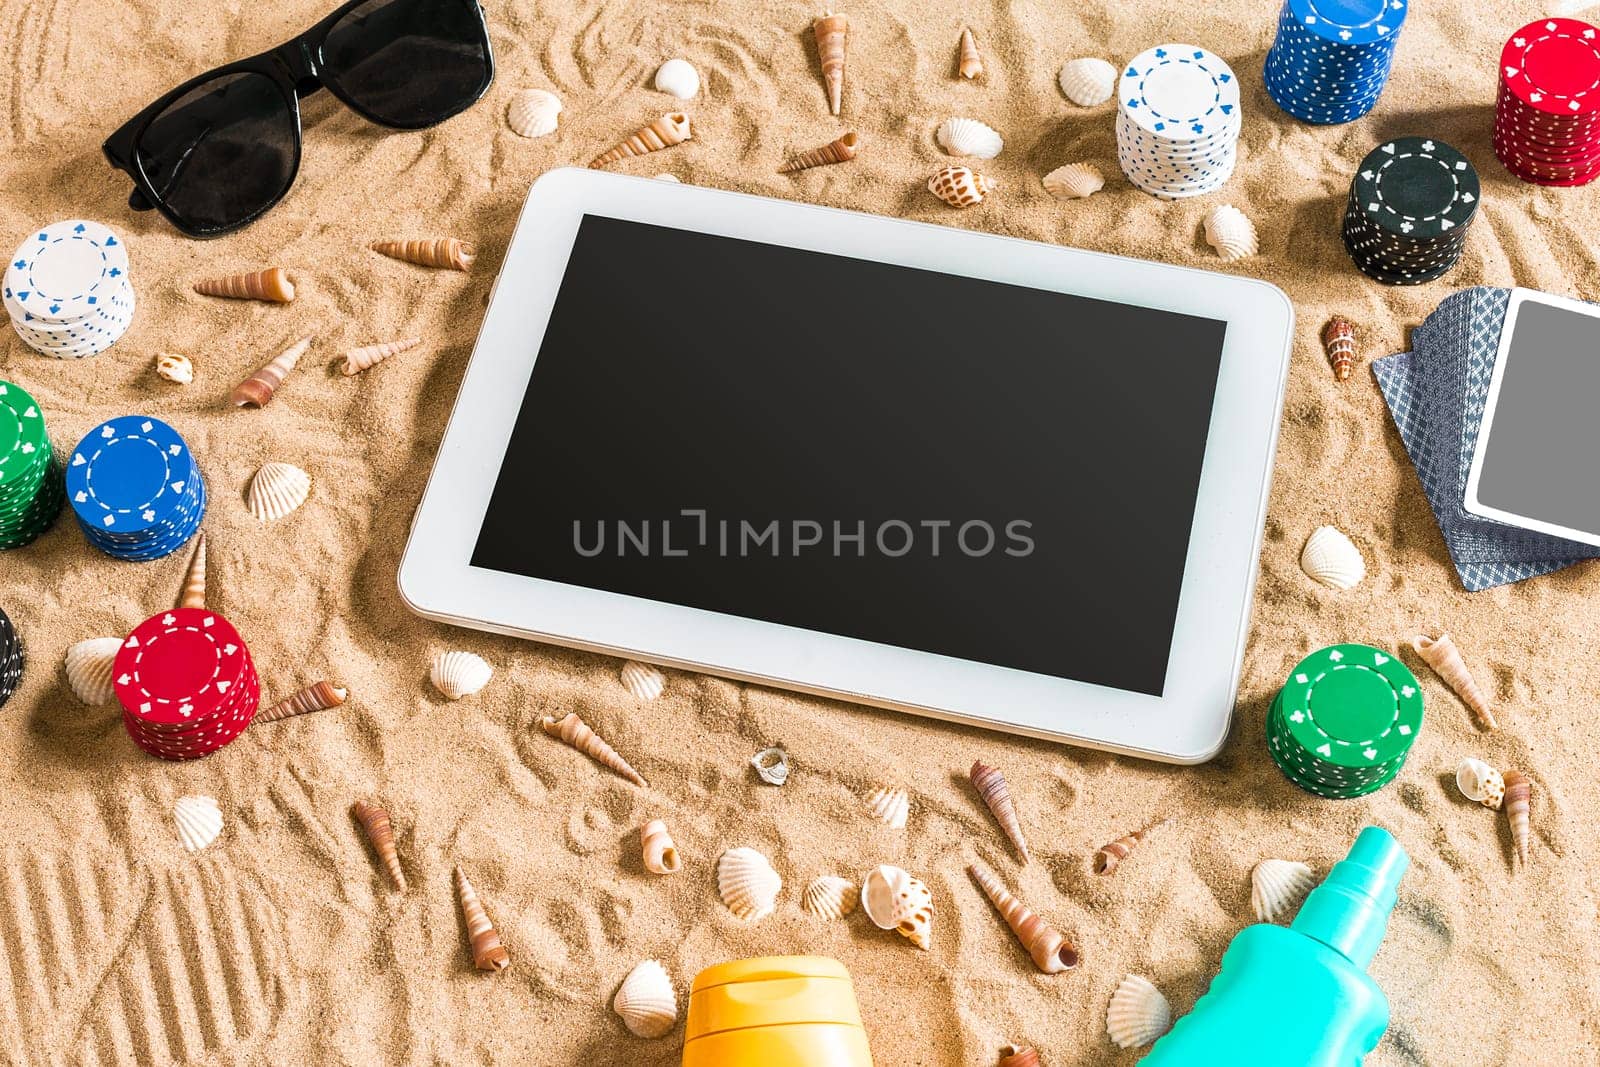 Gambling on vacation concept - white sand with seashells , colored poker chips and cards. Top view. Copy space. Summer